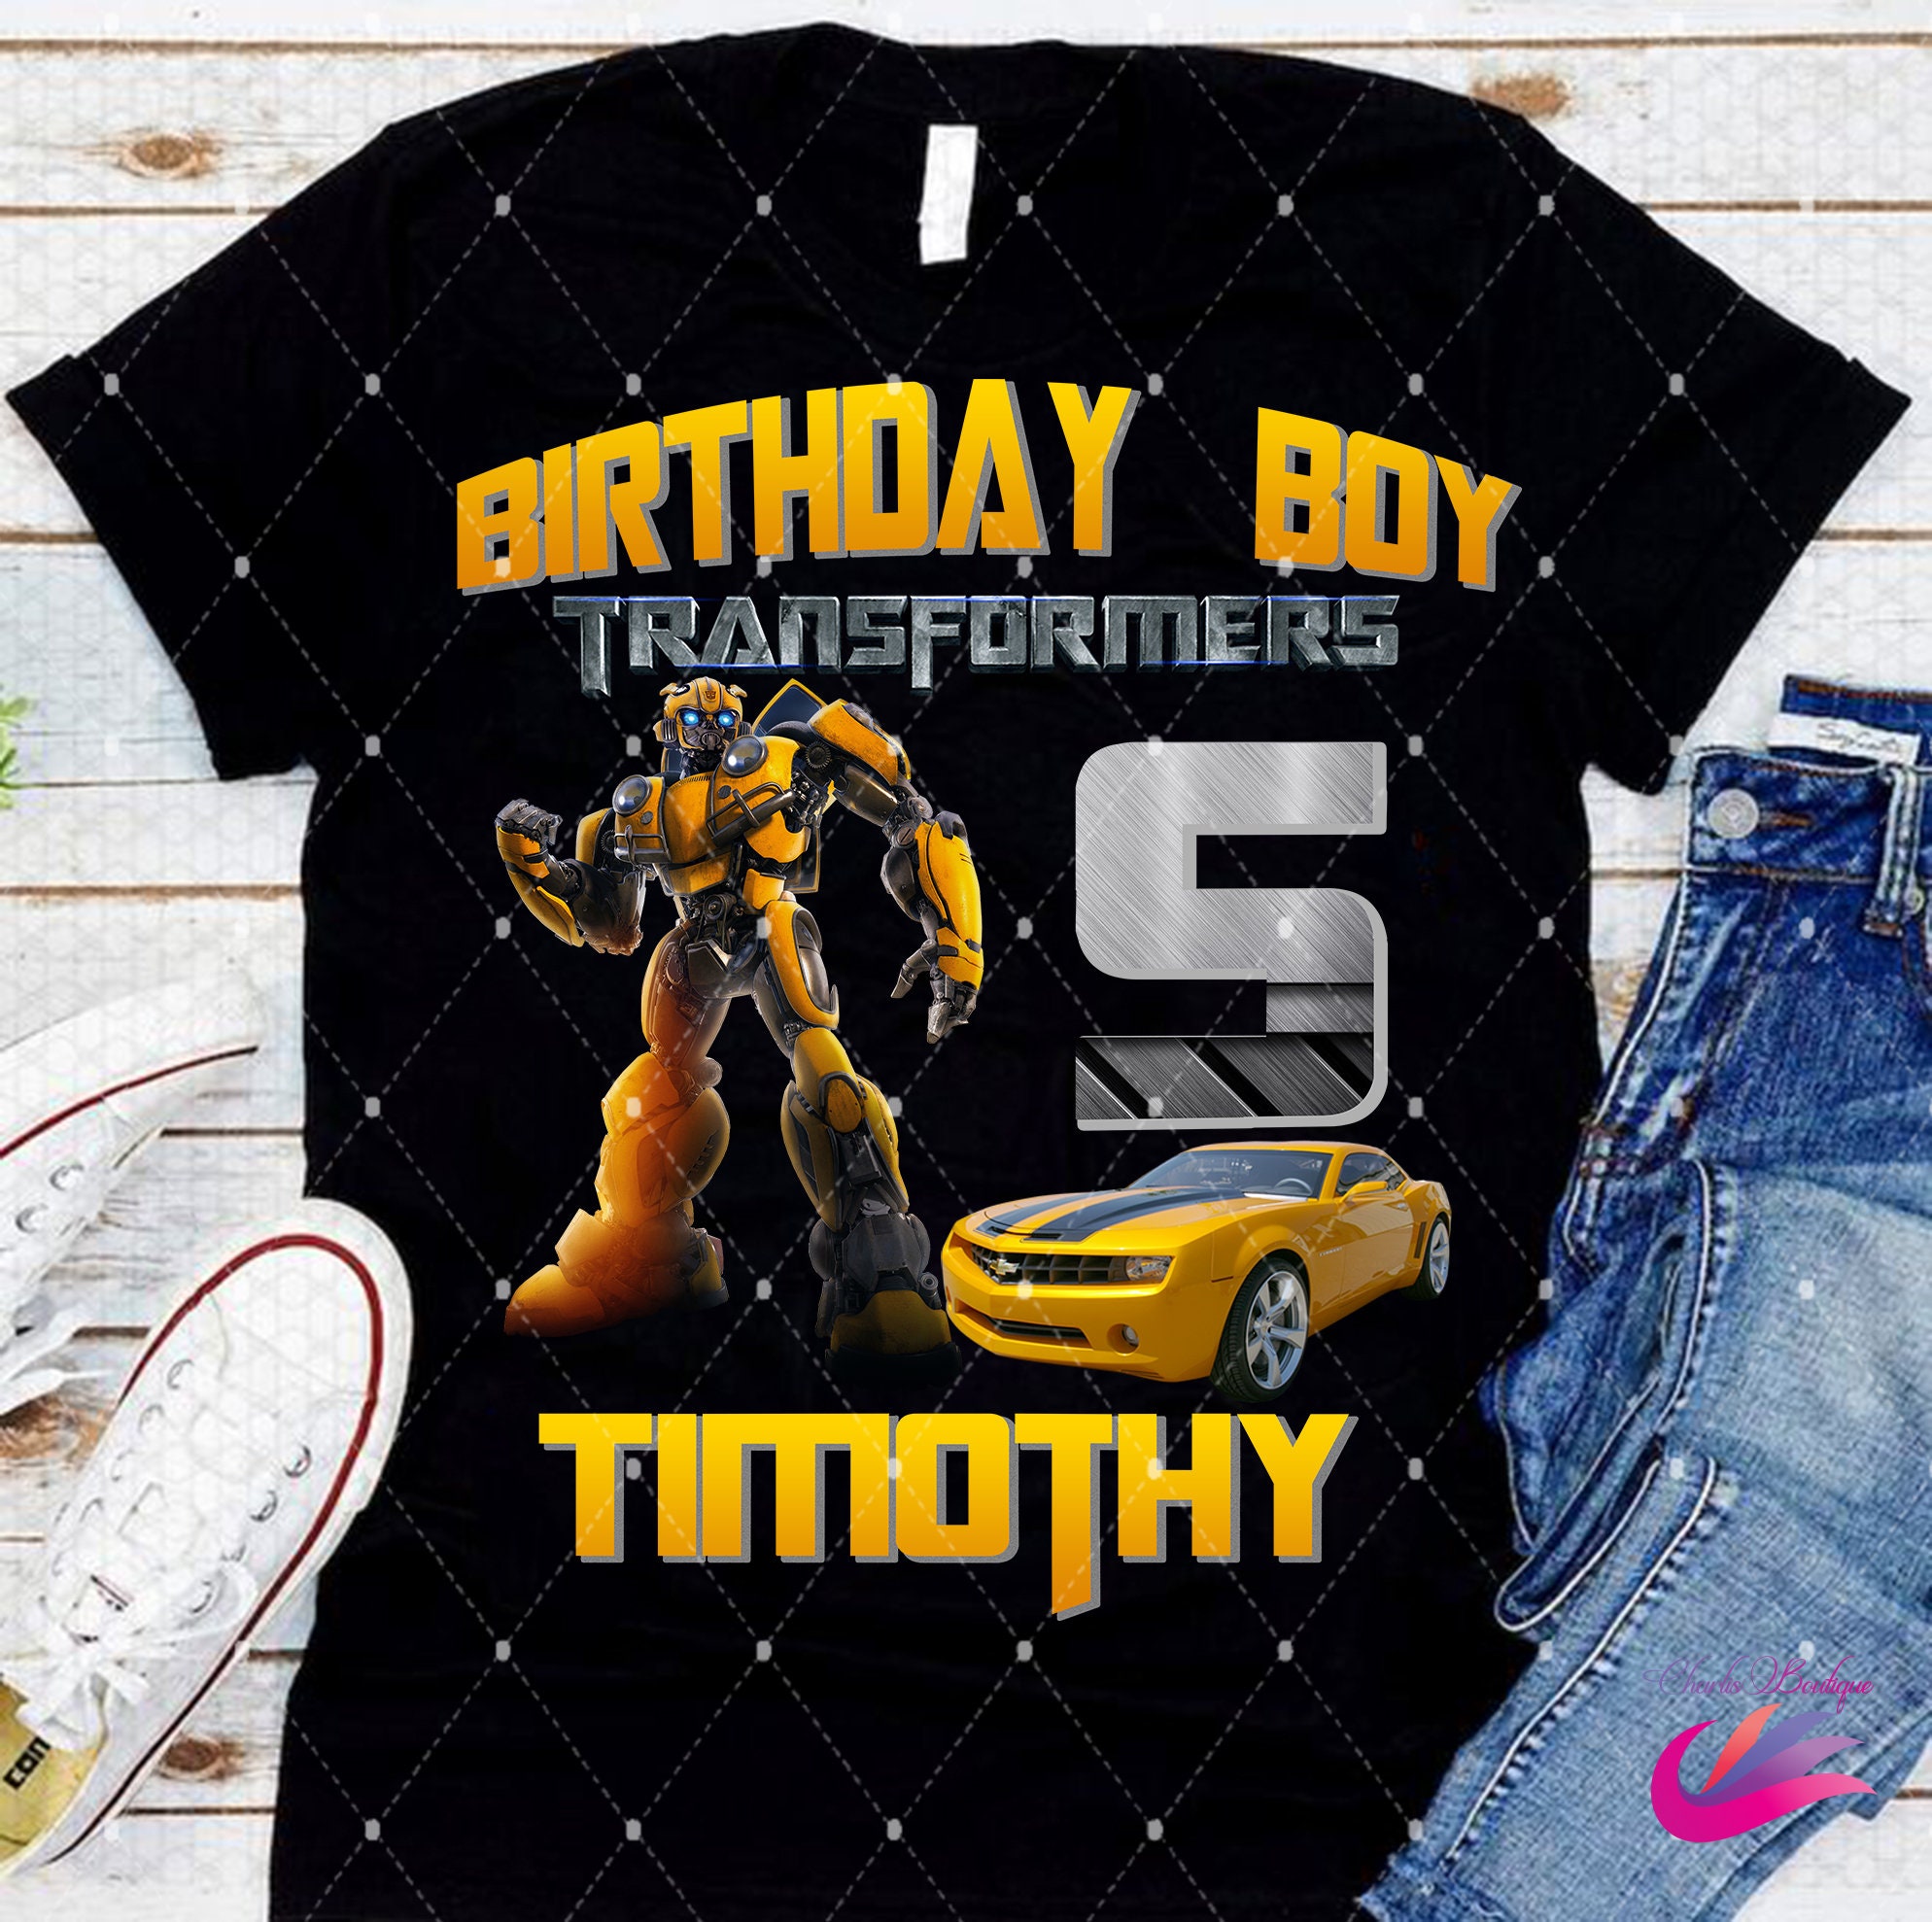 Transformers Bumblebee Personalized Custom Birthday Shirt in 8 Different Colors